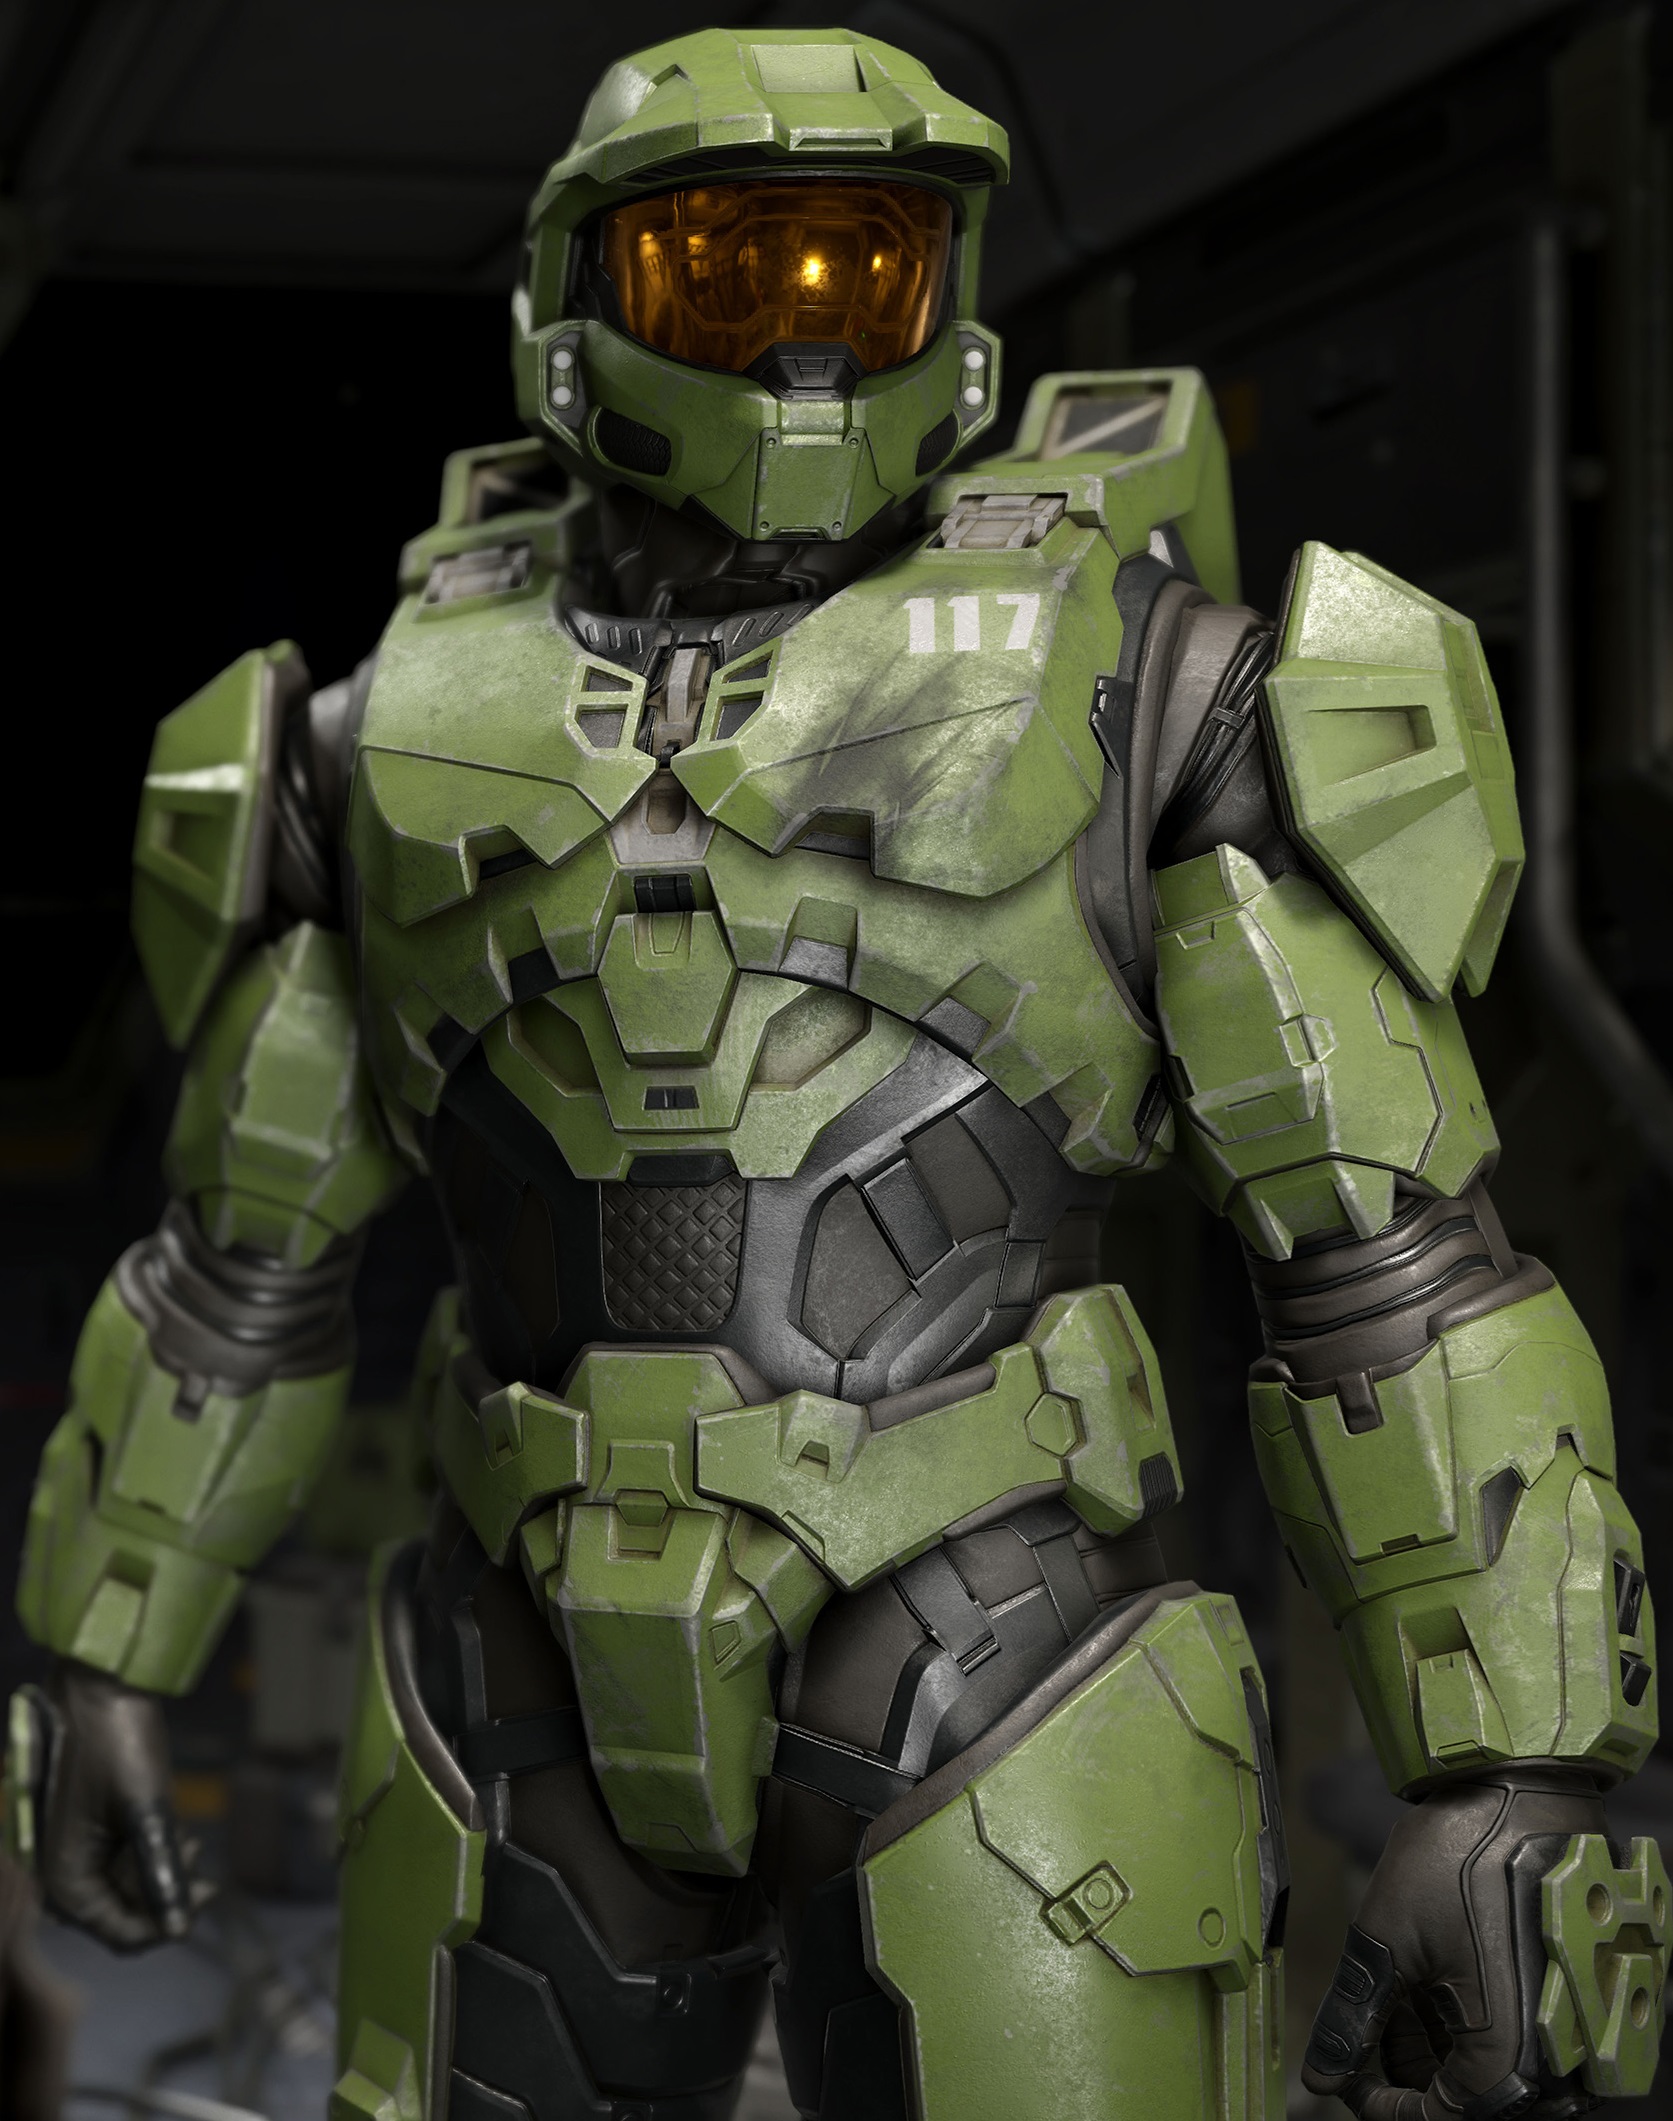 How Master Chief’s iconic Halo armor has changed over the years